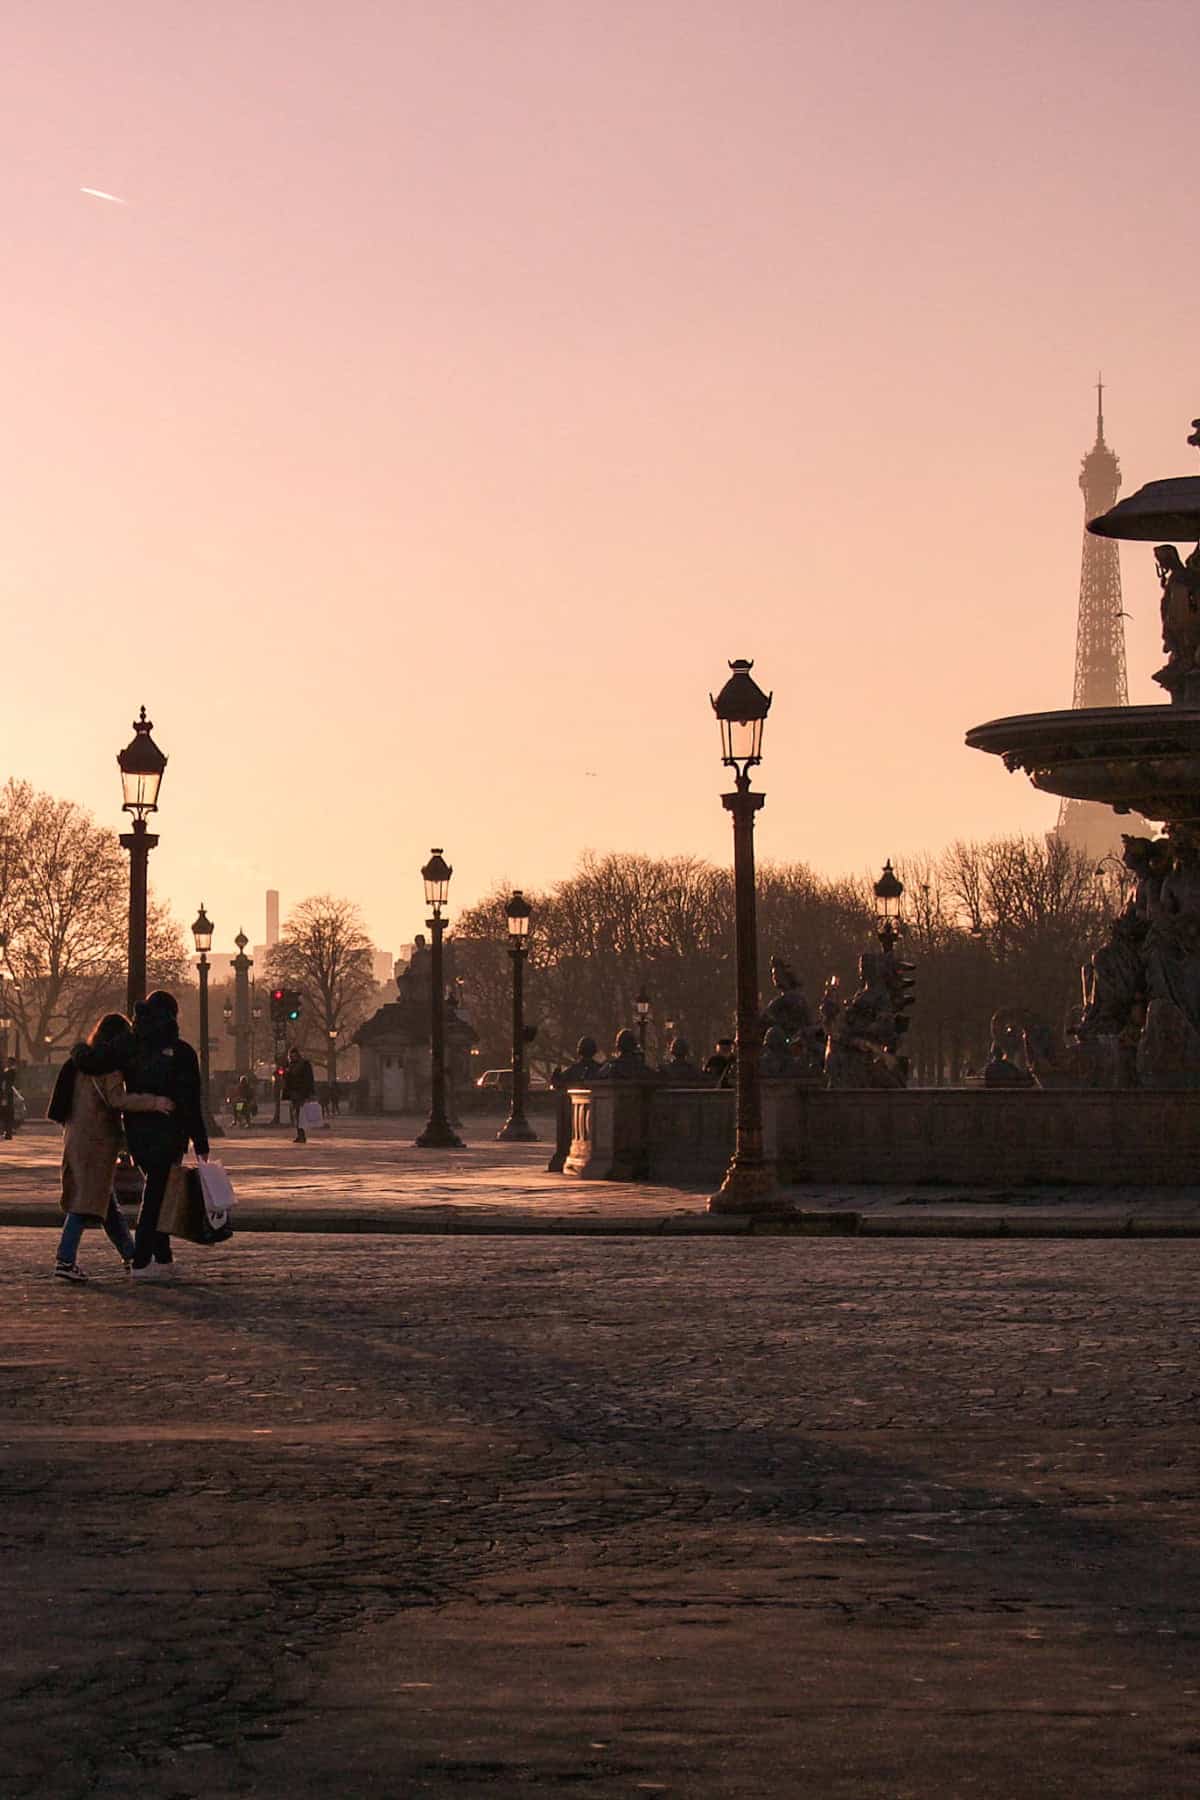 Two lovers walking with their arms around each other at sunset in Paris' Place de la Concorde, with a view of the Eiffel Tower 